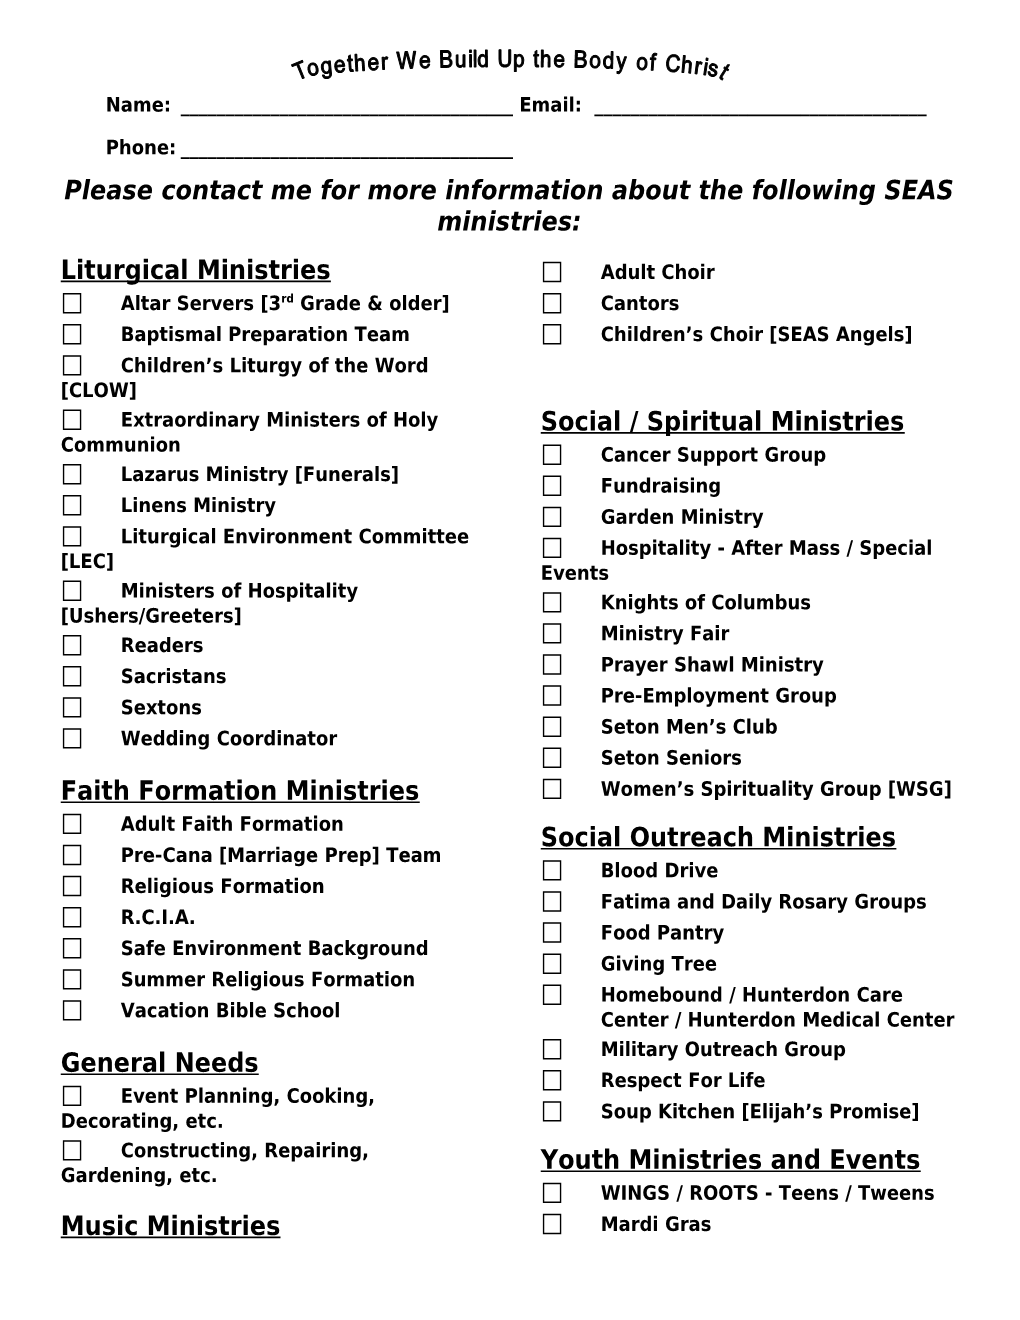 Please Contact Me for More Information About the Following SEAS Ministries